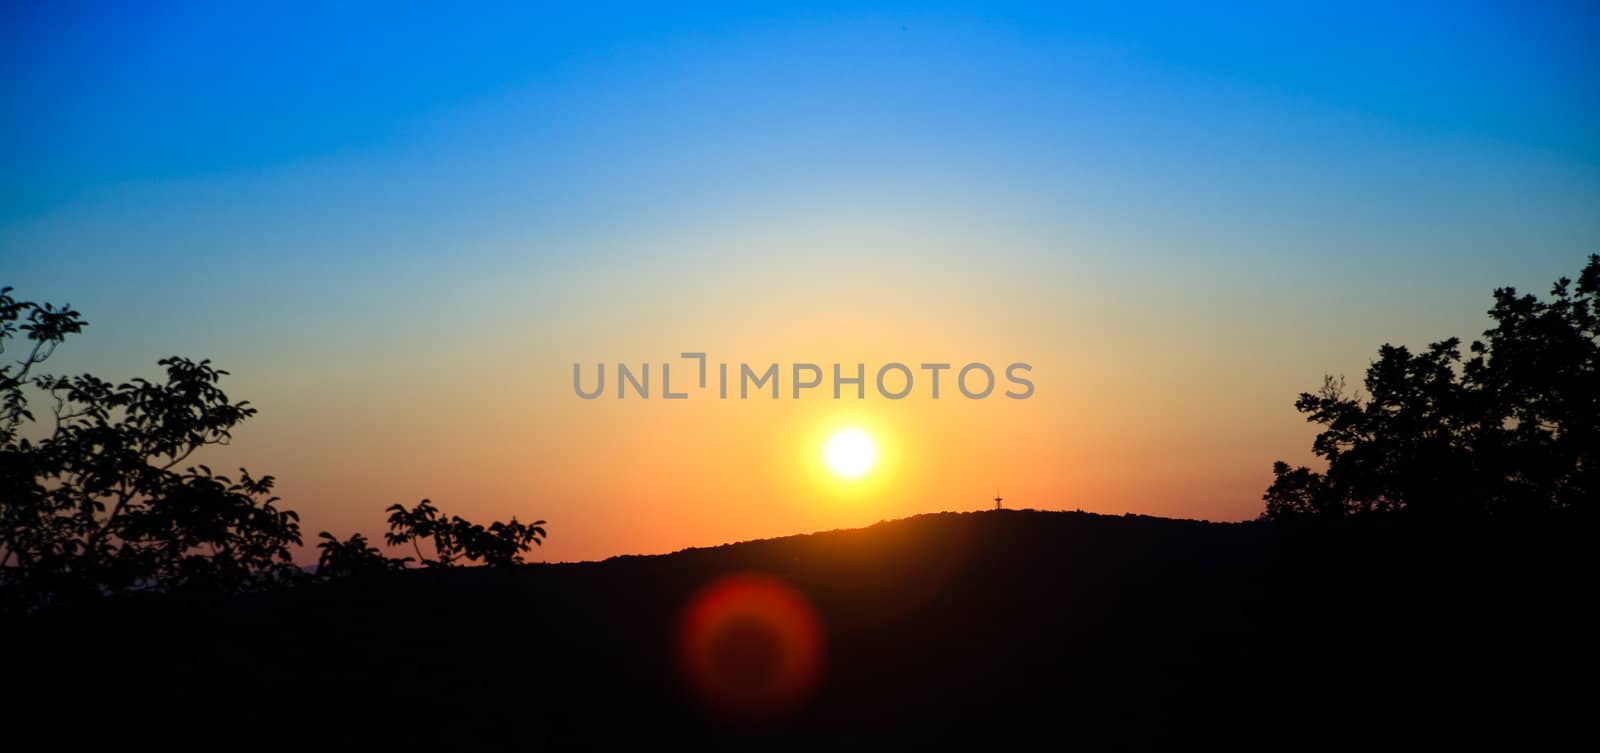 wounderful sunset with sun and siluet of trees and mountains by anobis